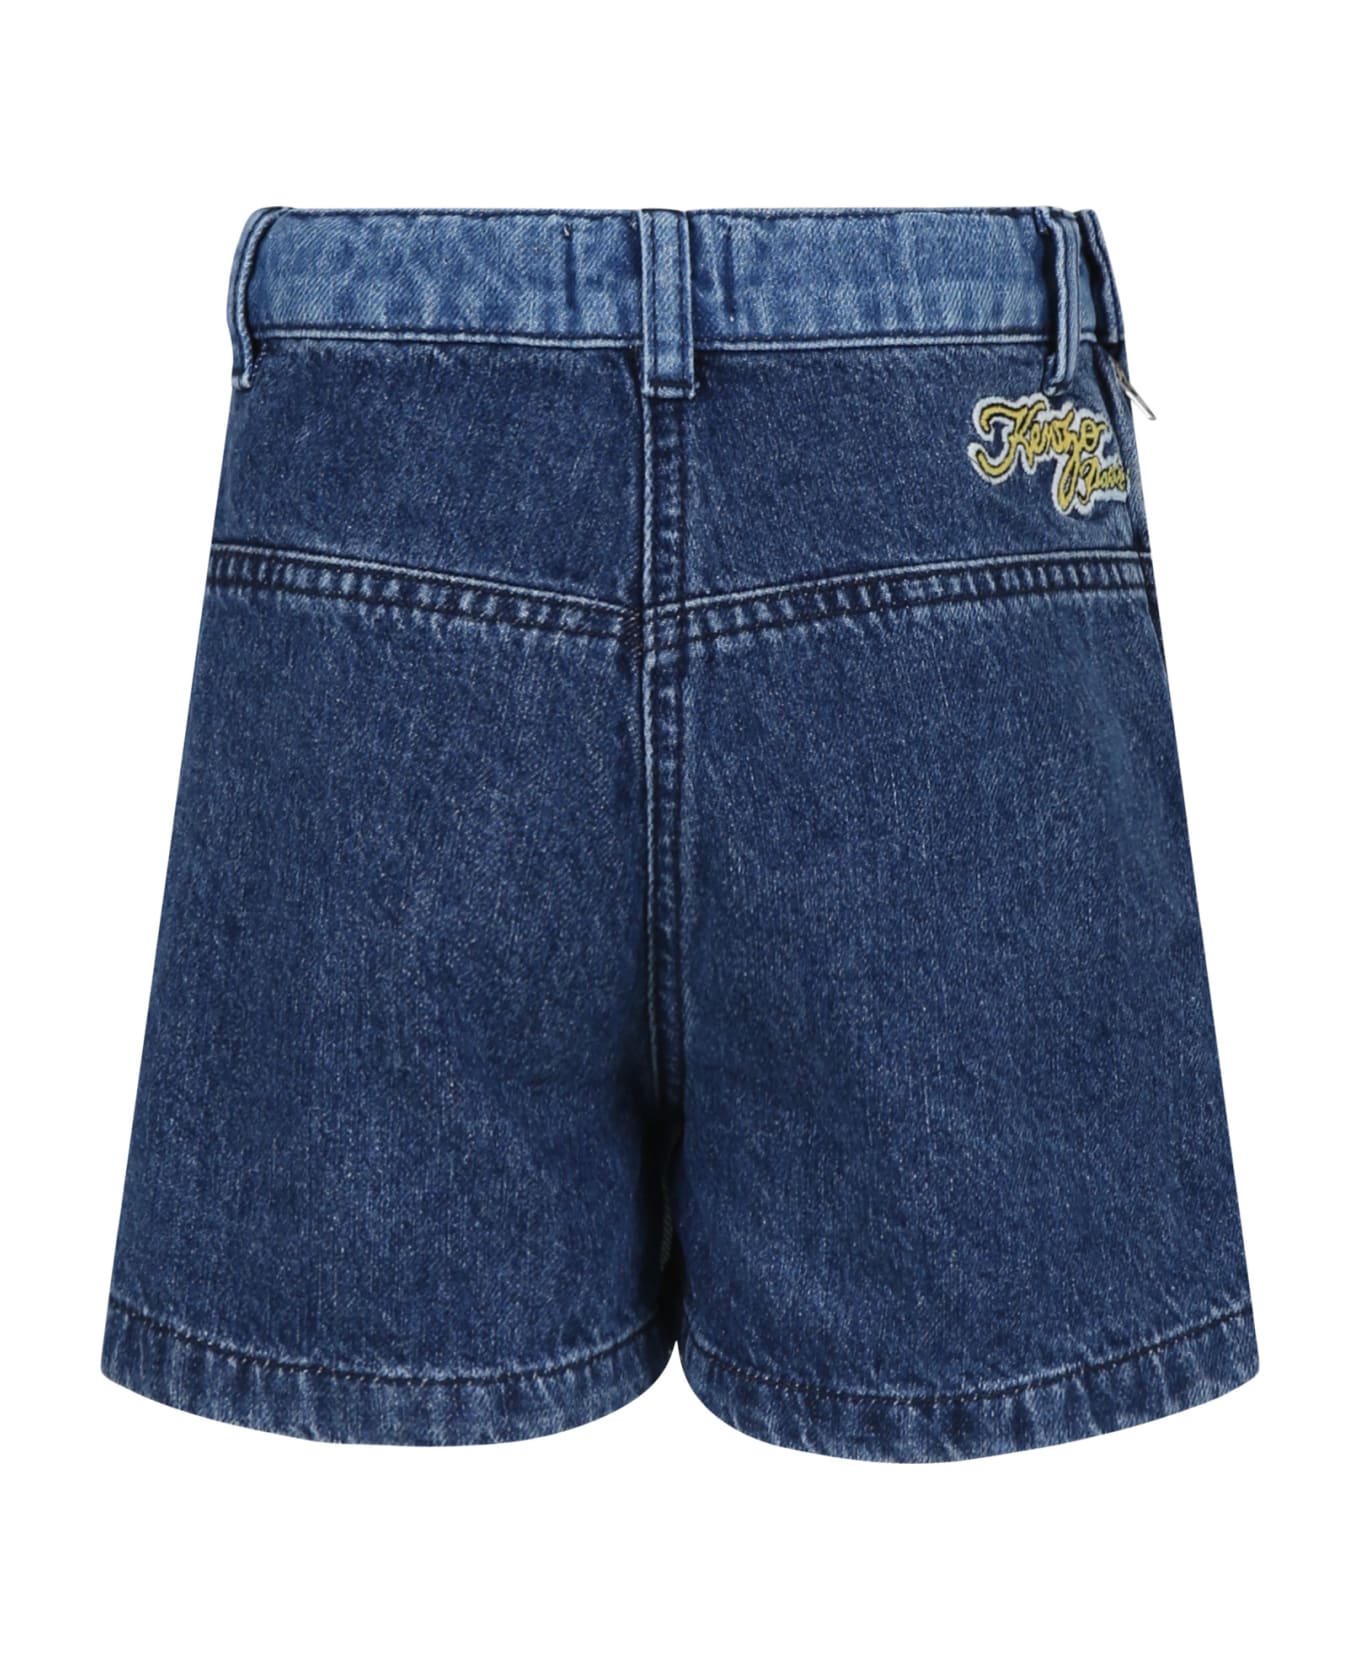 Kenzo Kids Denim Shorts For Girl With Multicolor Embroidery - Denim